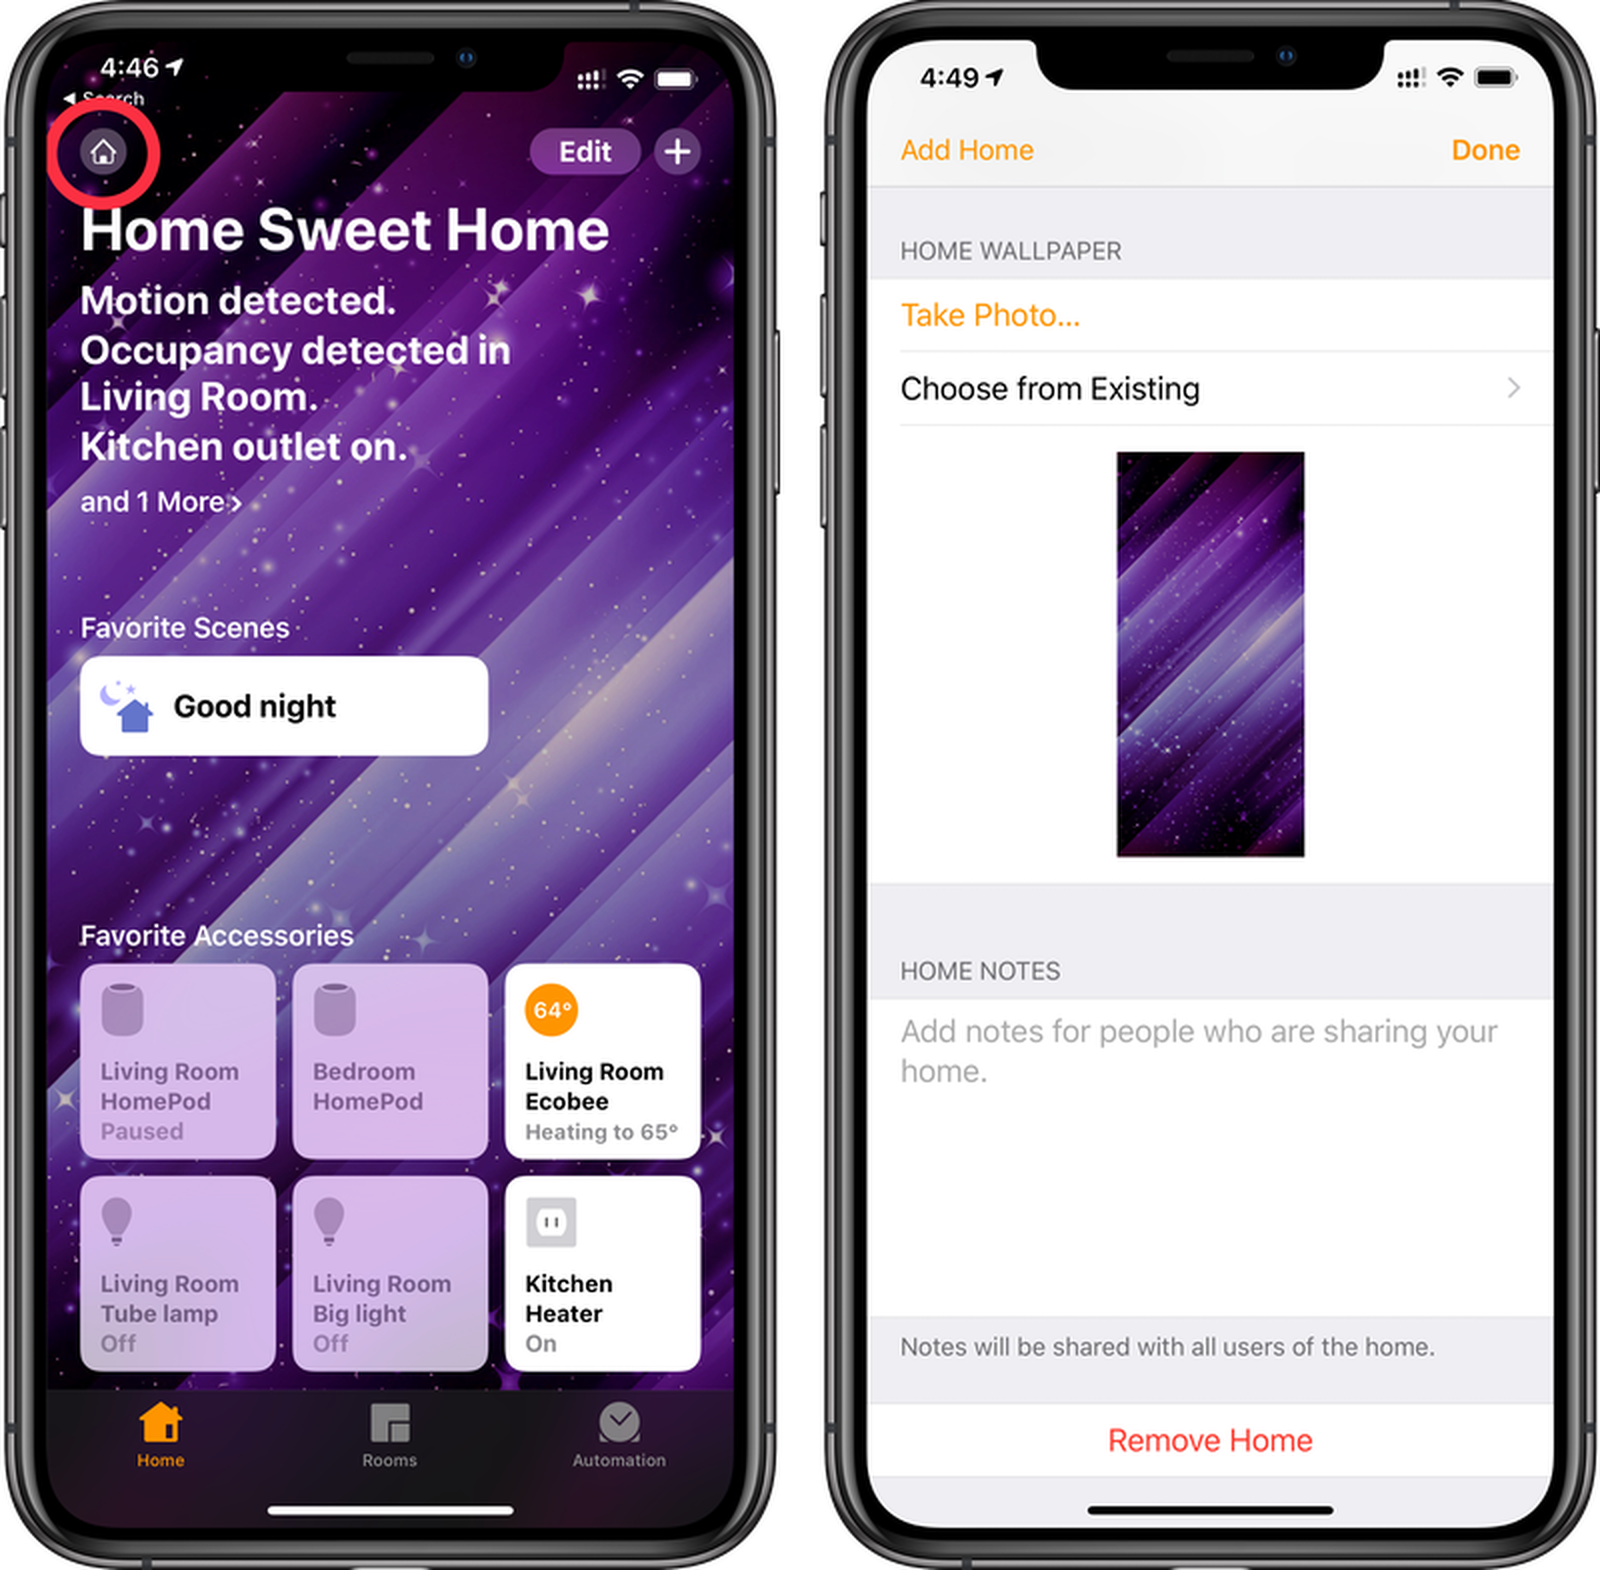 How to Change the Wallpaper in the Home App - MacRumors